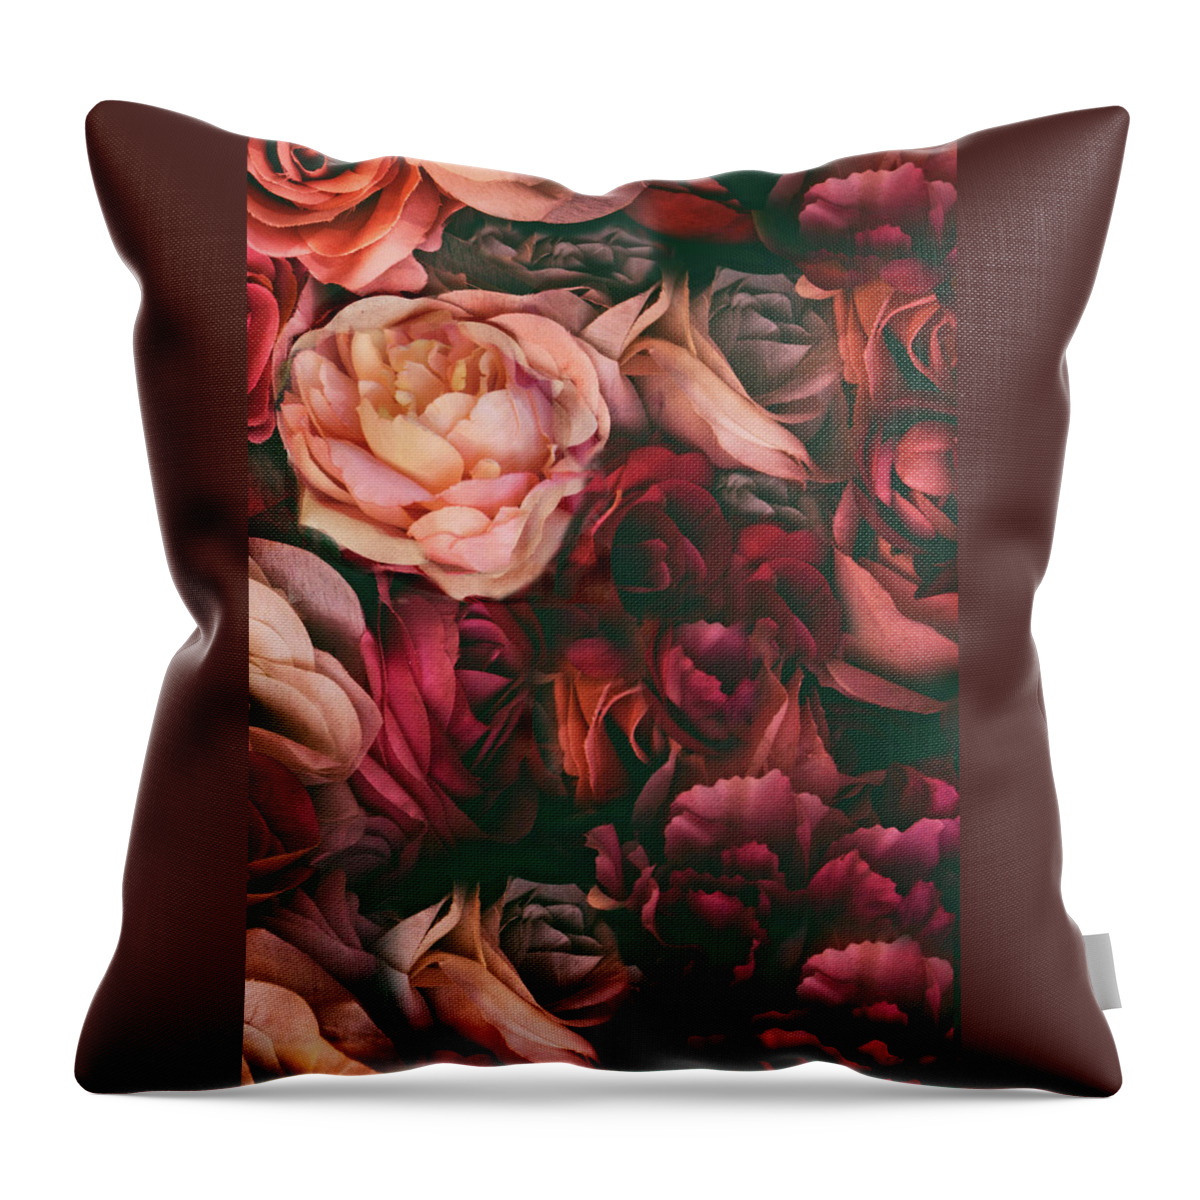 Roses Throw Pillow featuring the photograph Claret Collection by Jessica Jenney